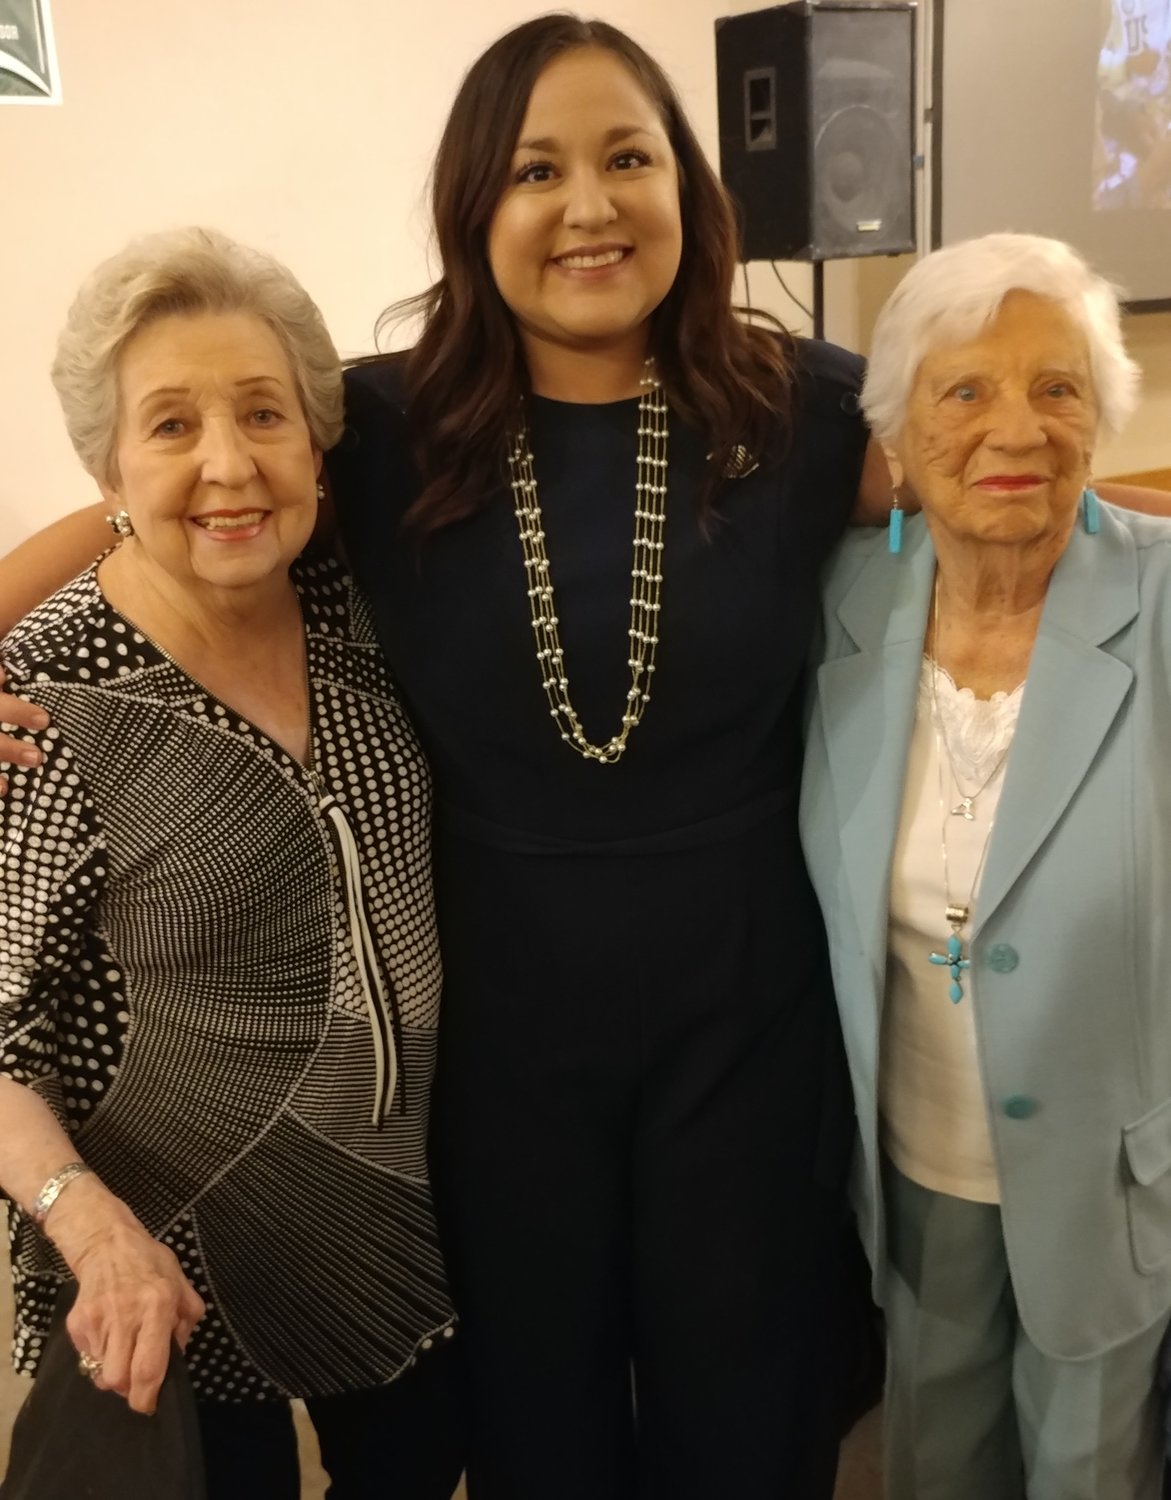 Left to right are Mary Henson, Boys and Girls Club of Las Cruces CEO Ashley Echevarria and Las Cruces icon Barbara Hubbard.